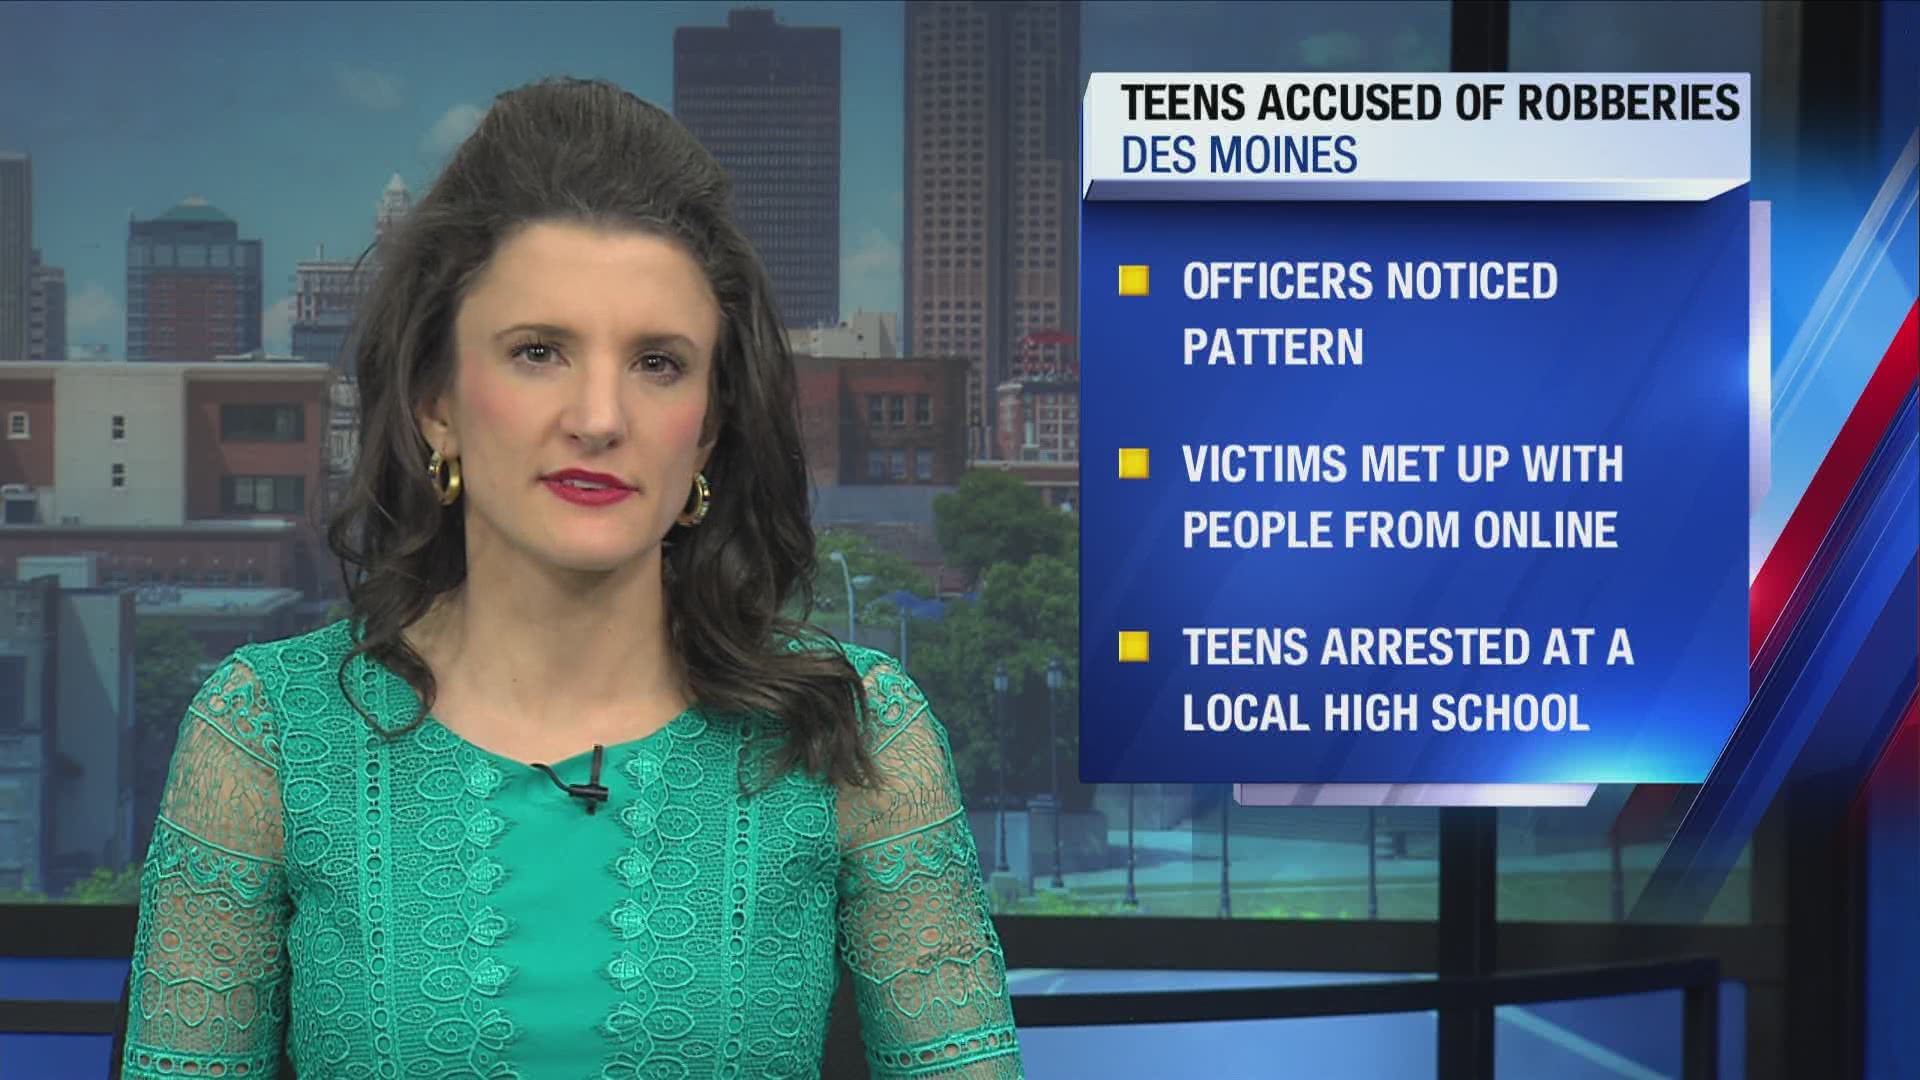 Two 16-year-olds and a 17-year-old were arrested for a string of robberies committed in mid-February.